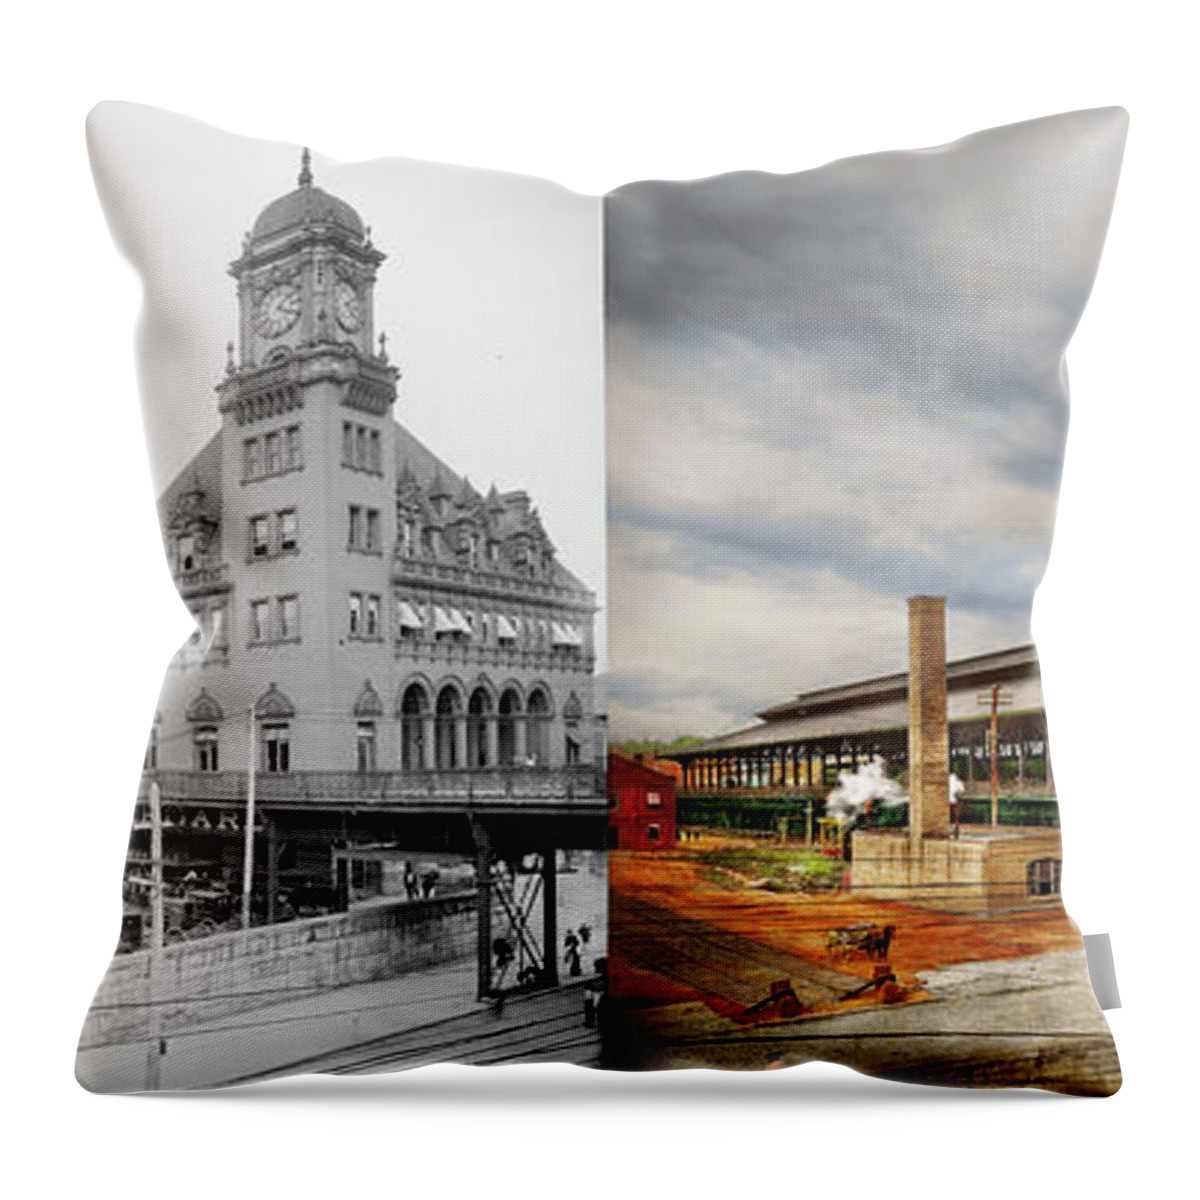 Richmond Throw Pillow featuring the photograph Train Station - Richmond VA - The Main Street Station 1905 - Side by Side by Mike Savad